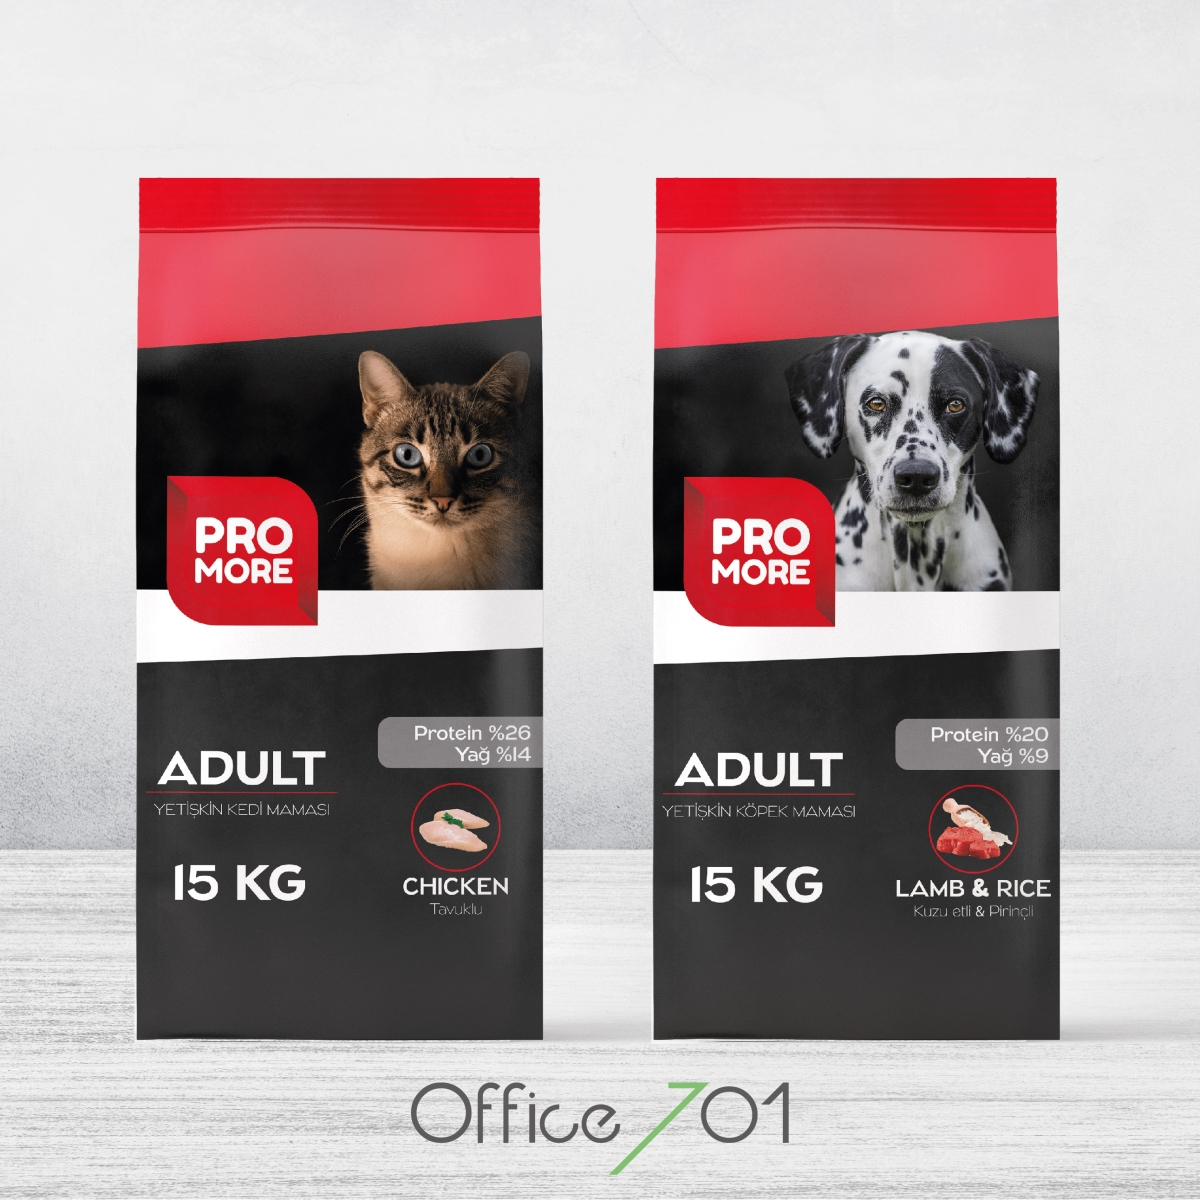 Office701 | Pro More | Pet Food Package Design